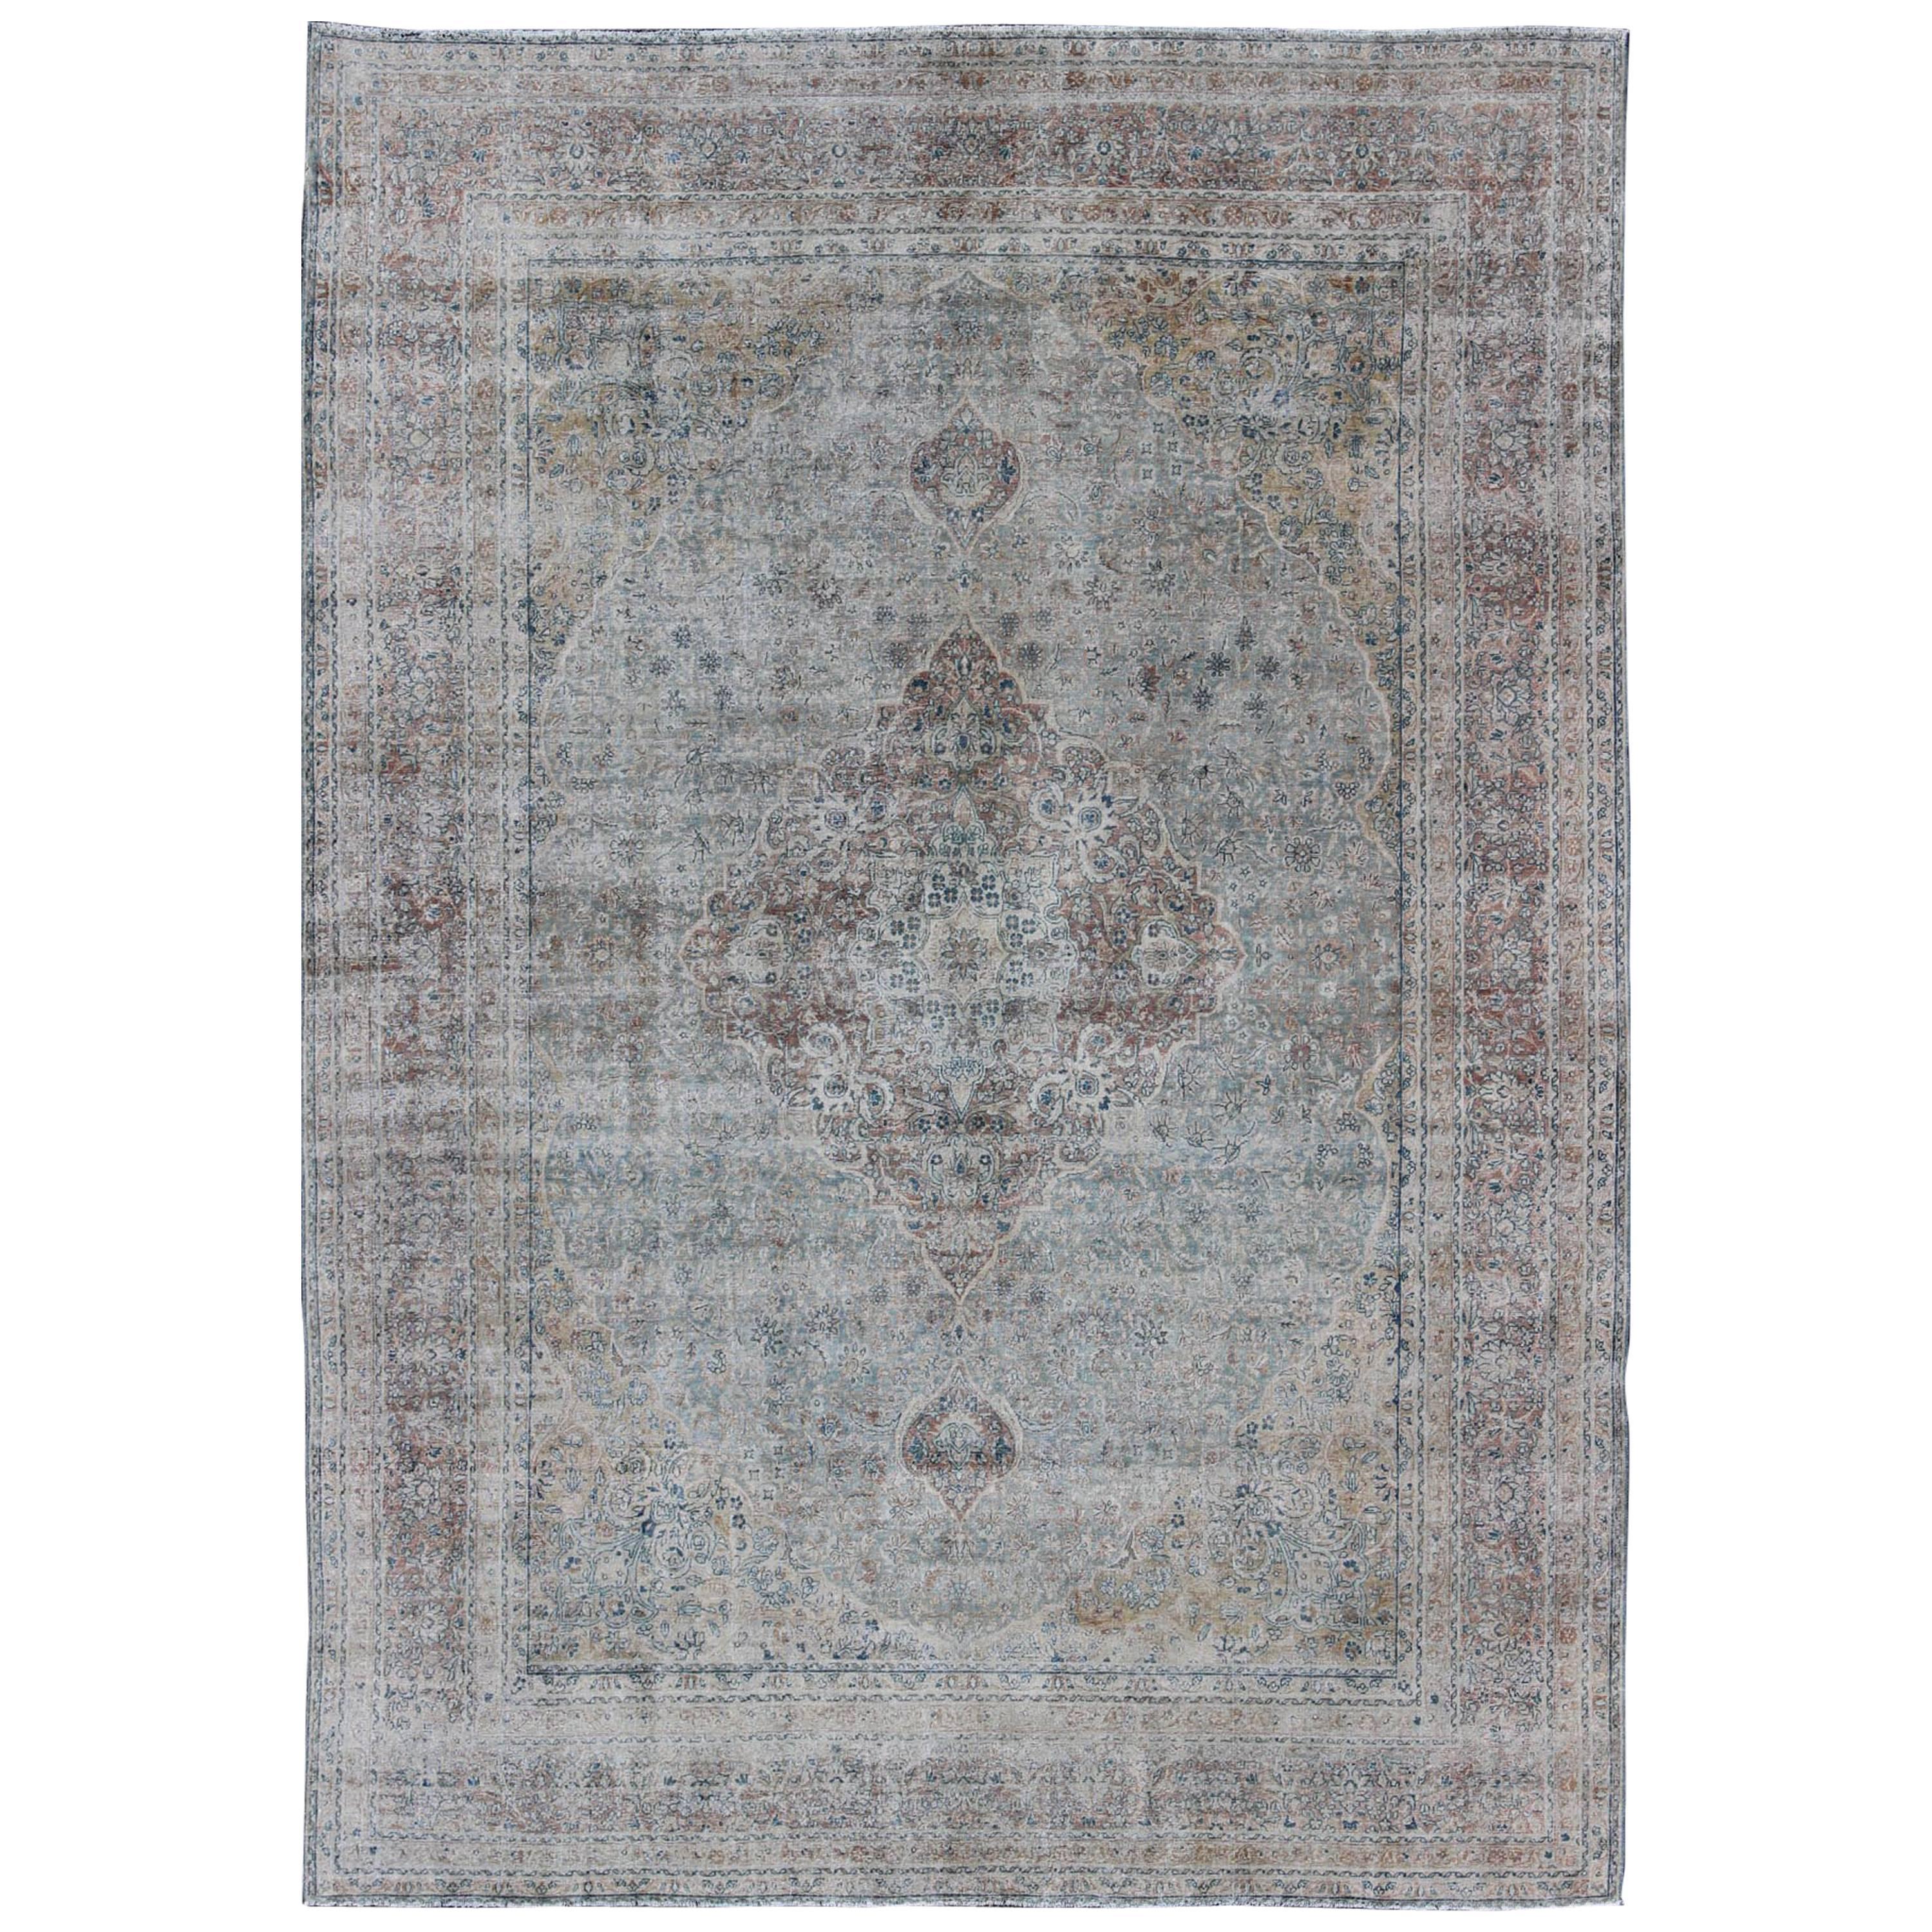 Antique Persian Tabriz Rug with Medallion Design in Grayish Blue, Gold, Brown